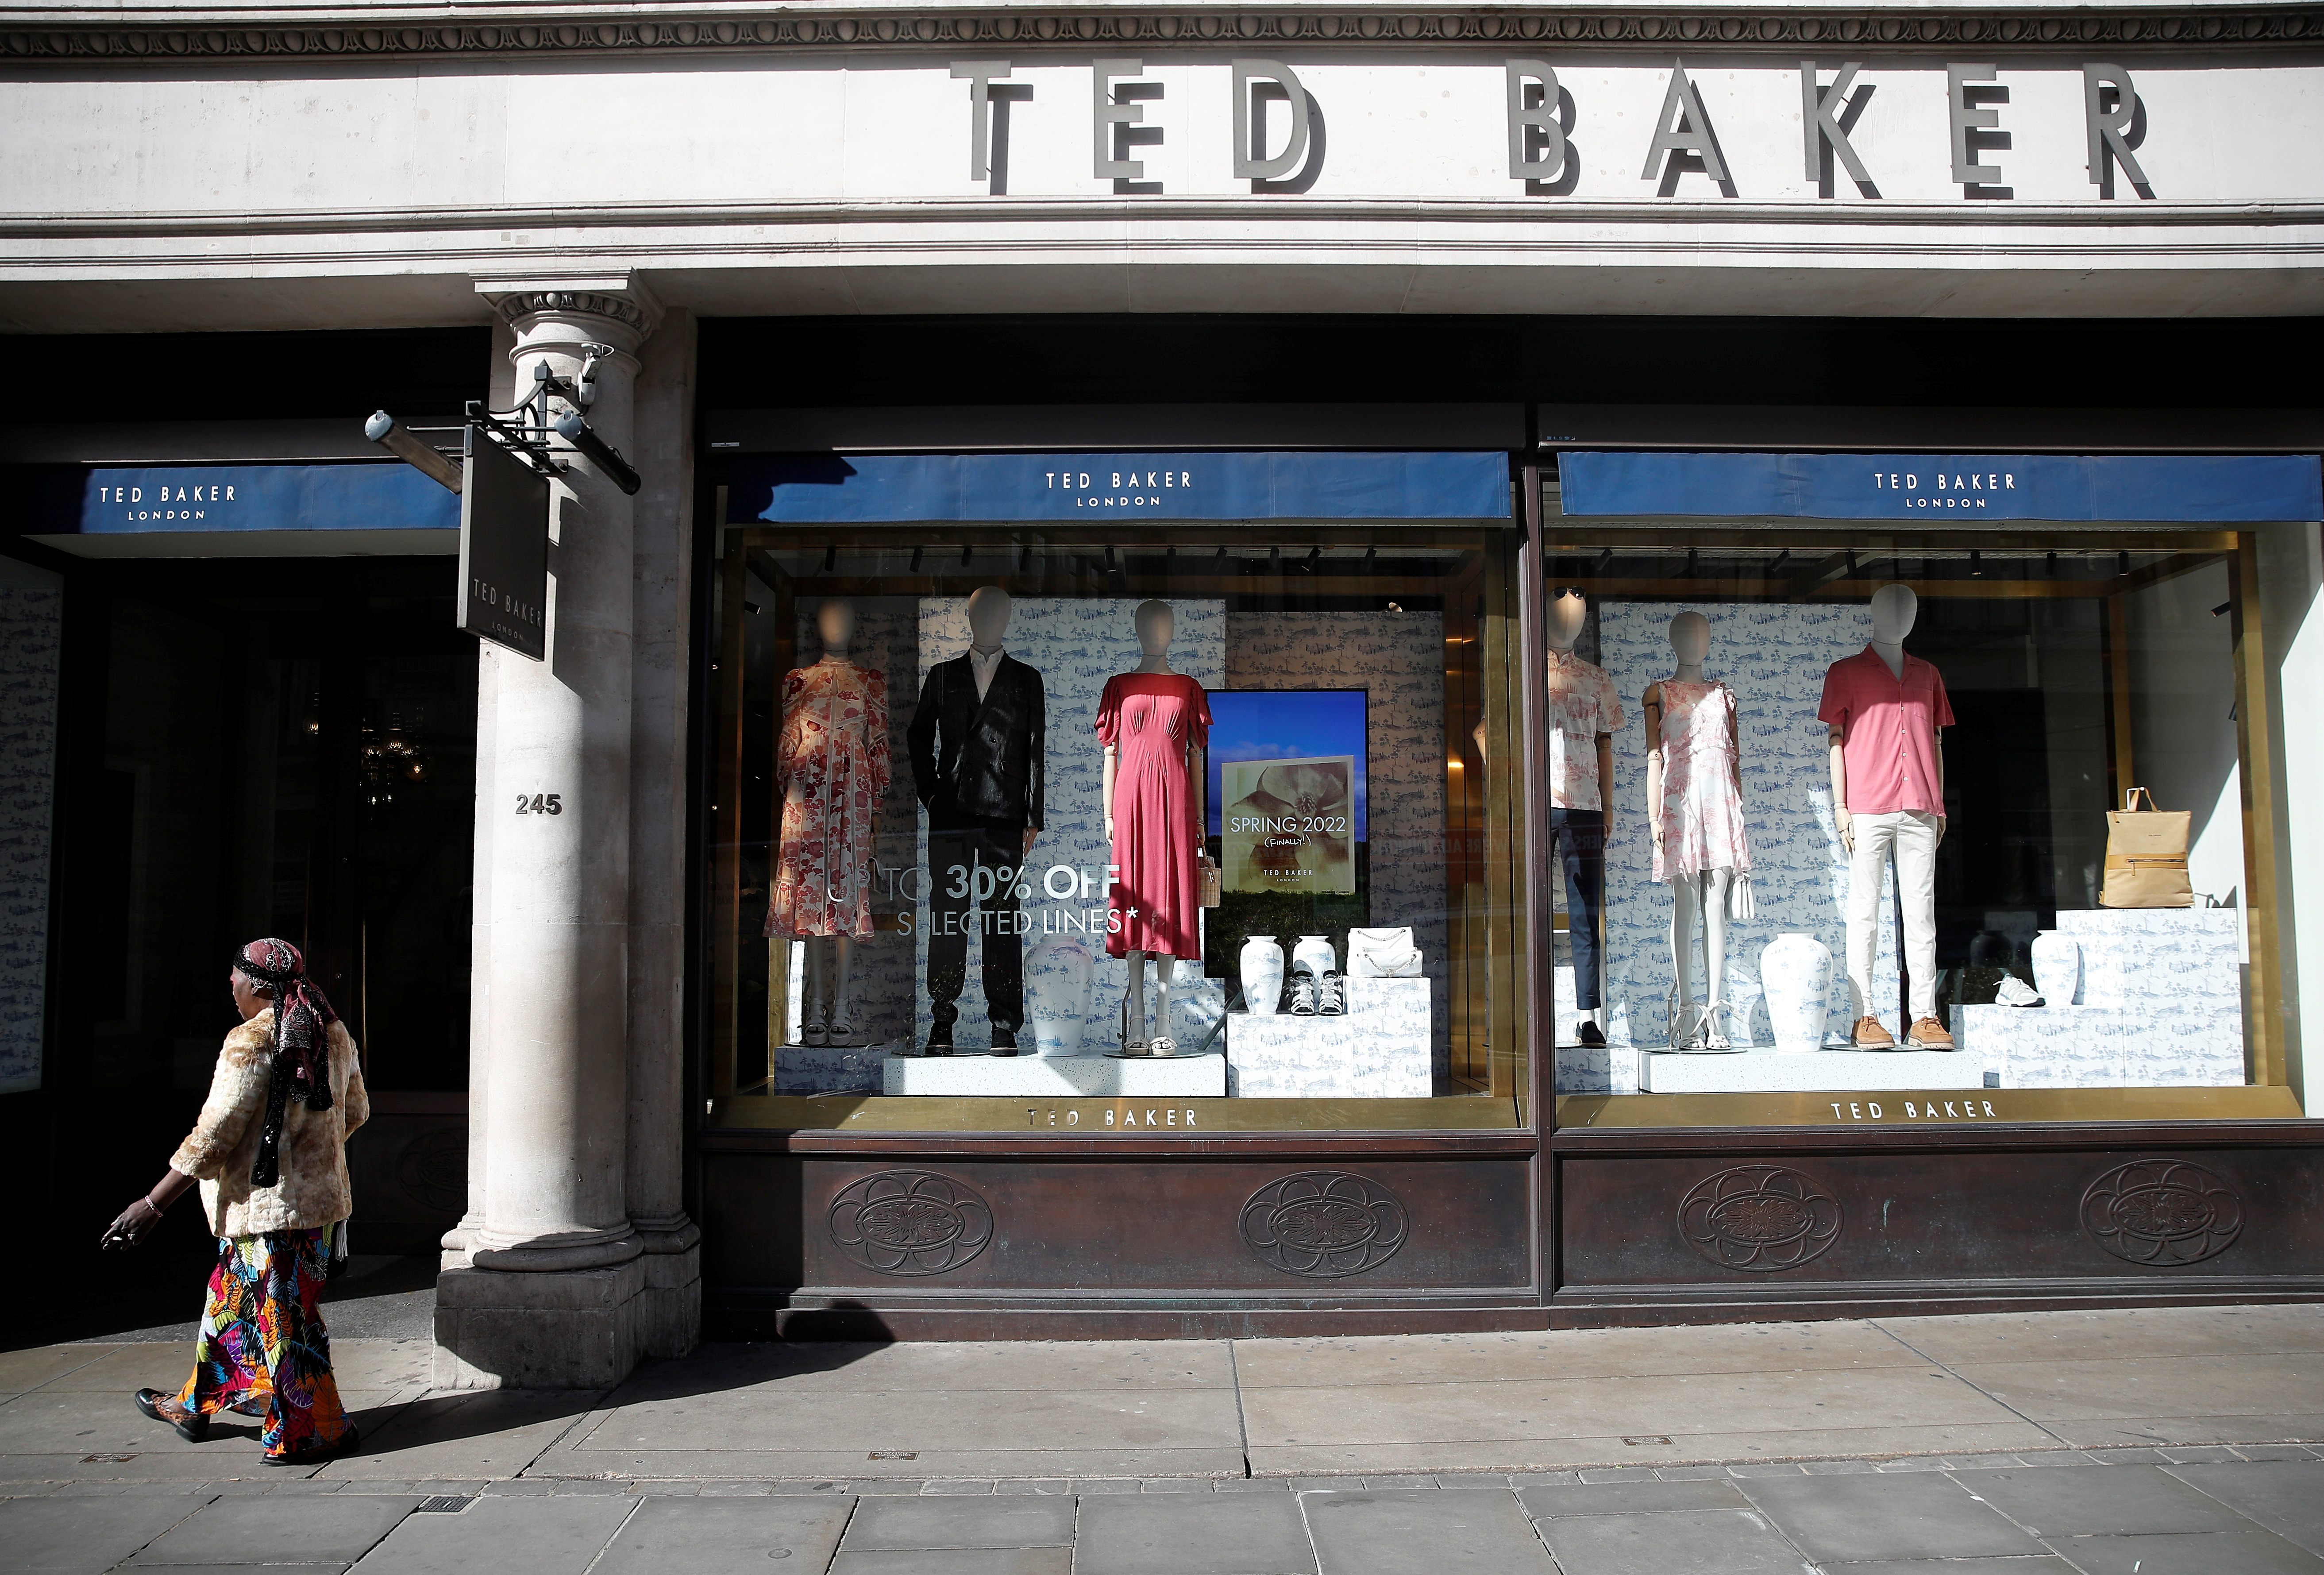 Ted Baker: latest news, analysis and trading updates